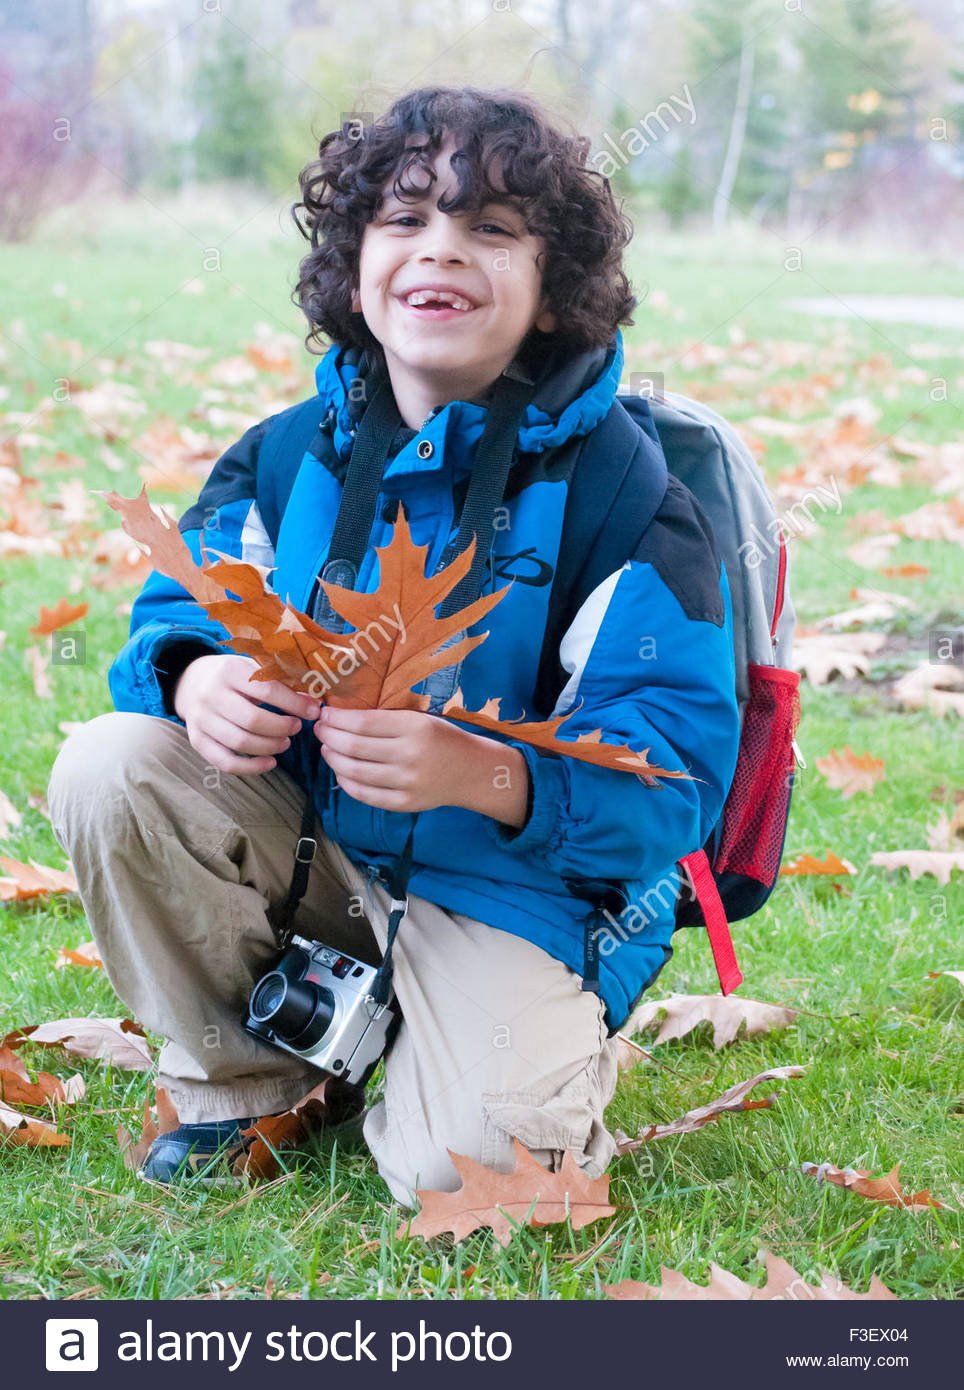 Boy With A Camera During Autumn Or Fall He Has Dark Curly